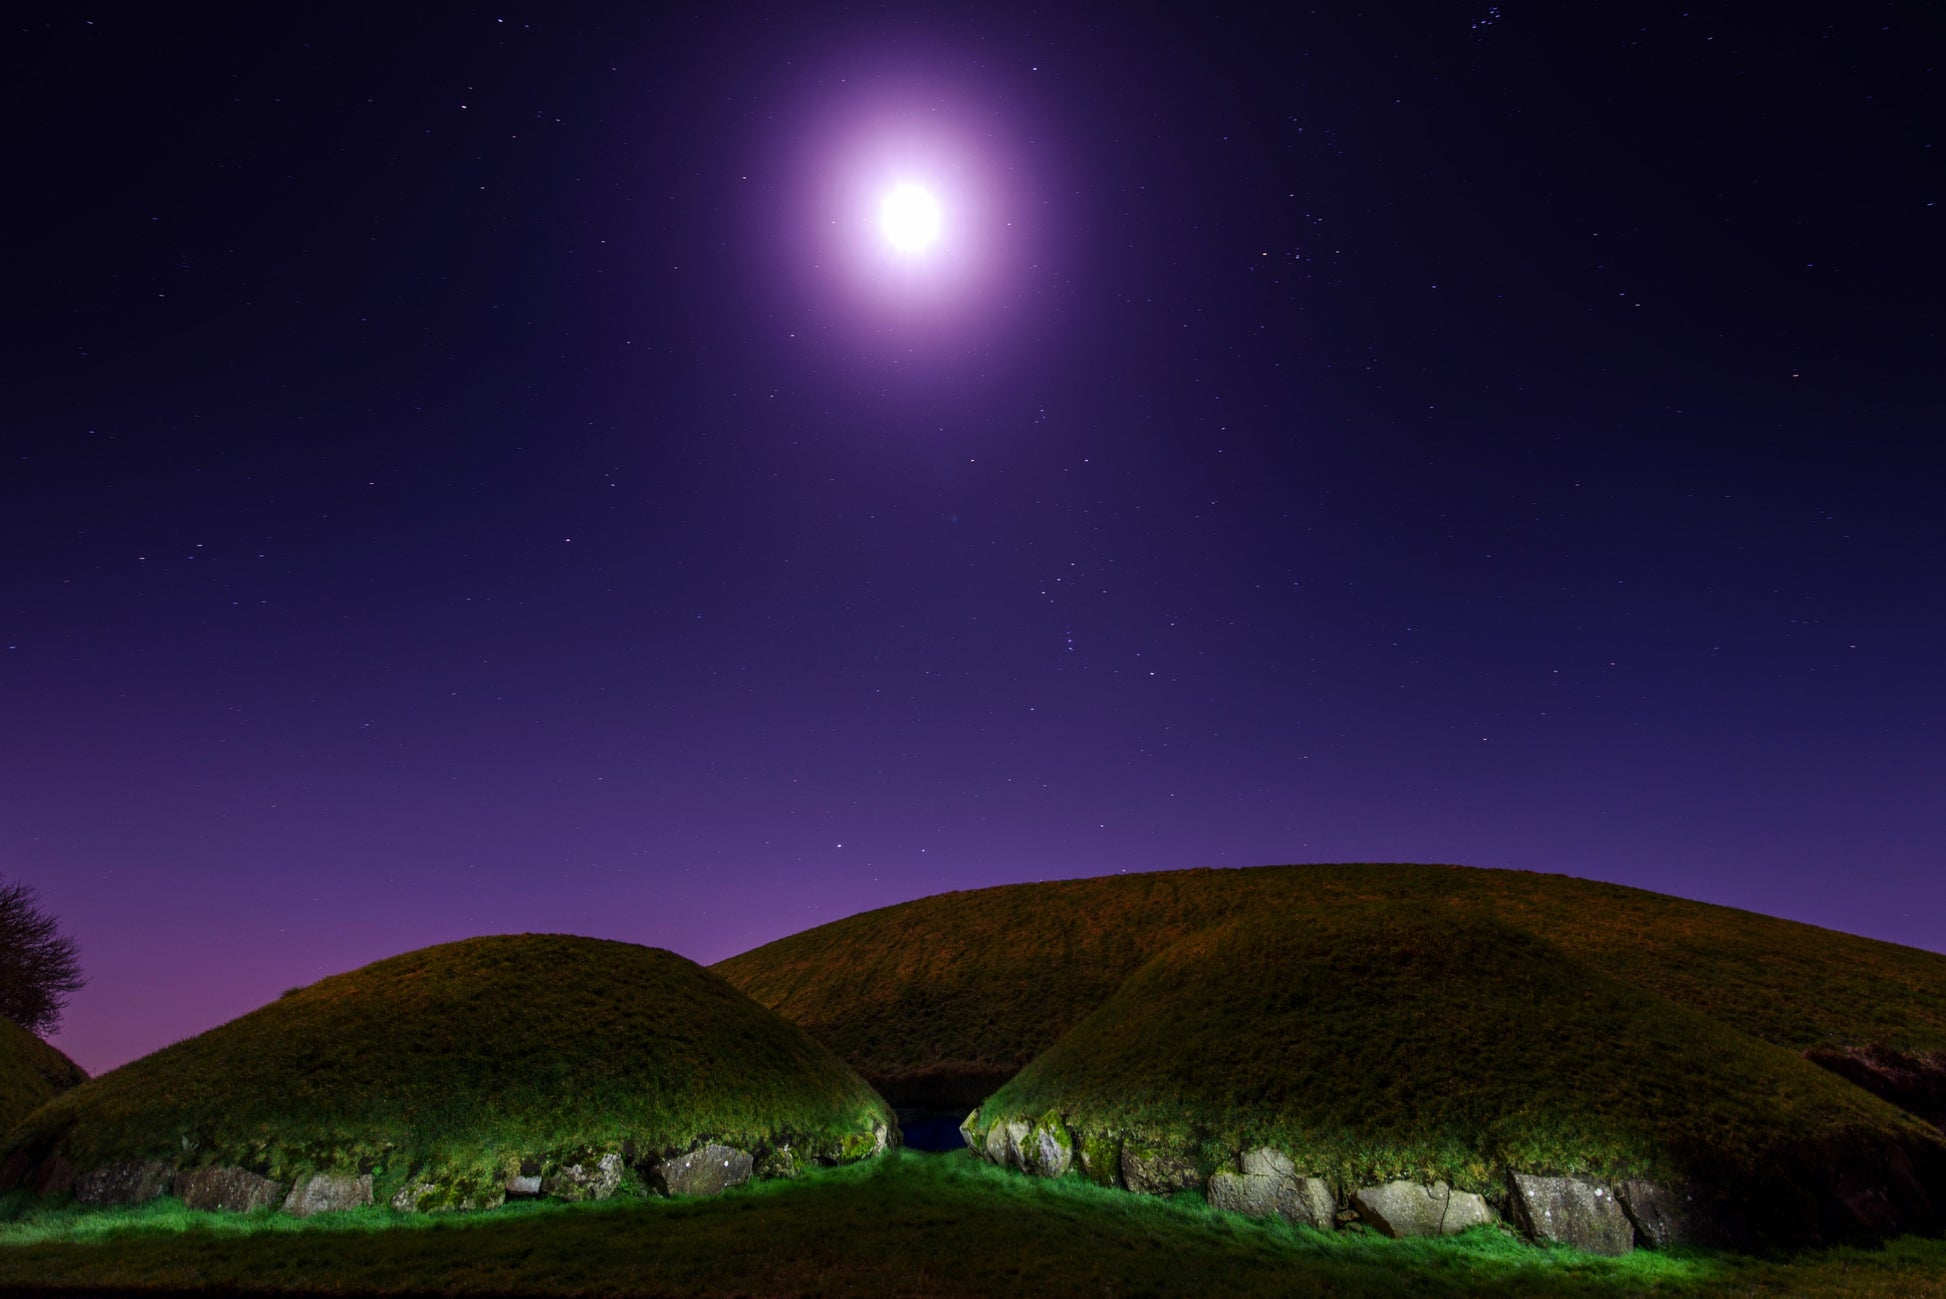 Orion carries the moon over Knowth in Meath Ireland